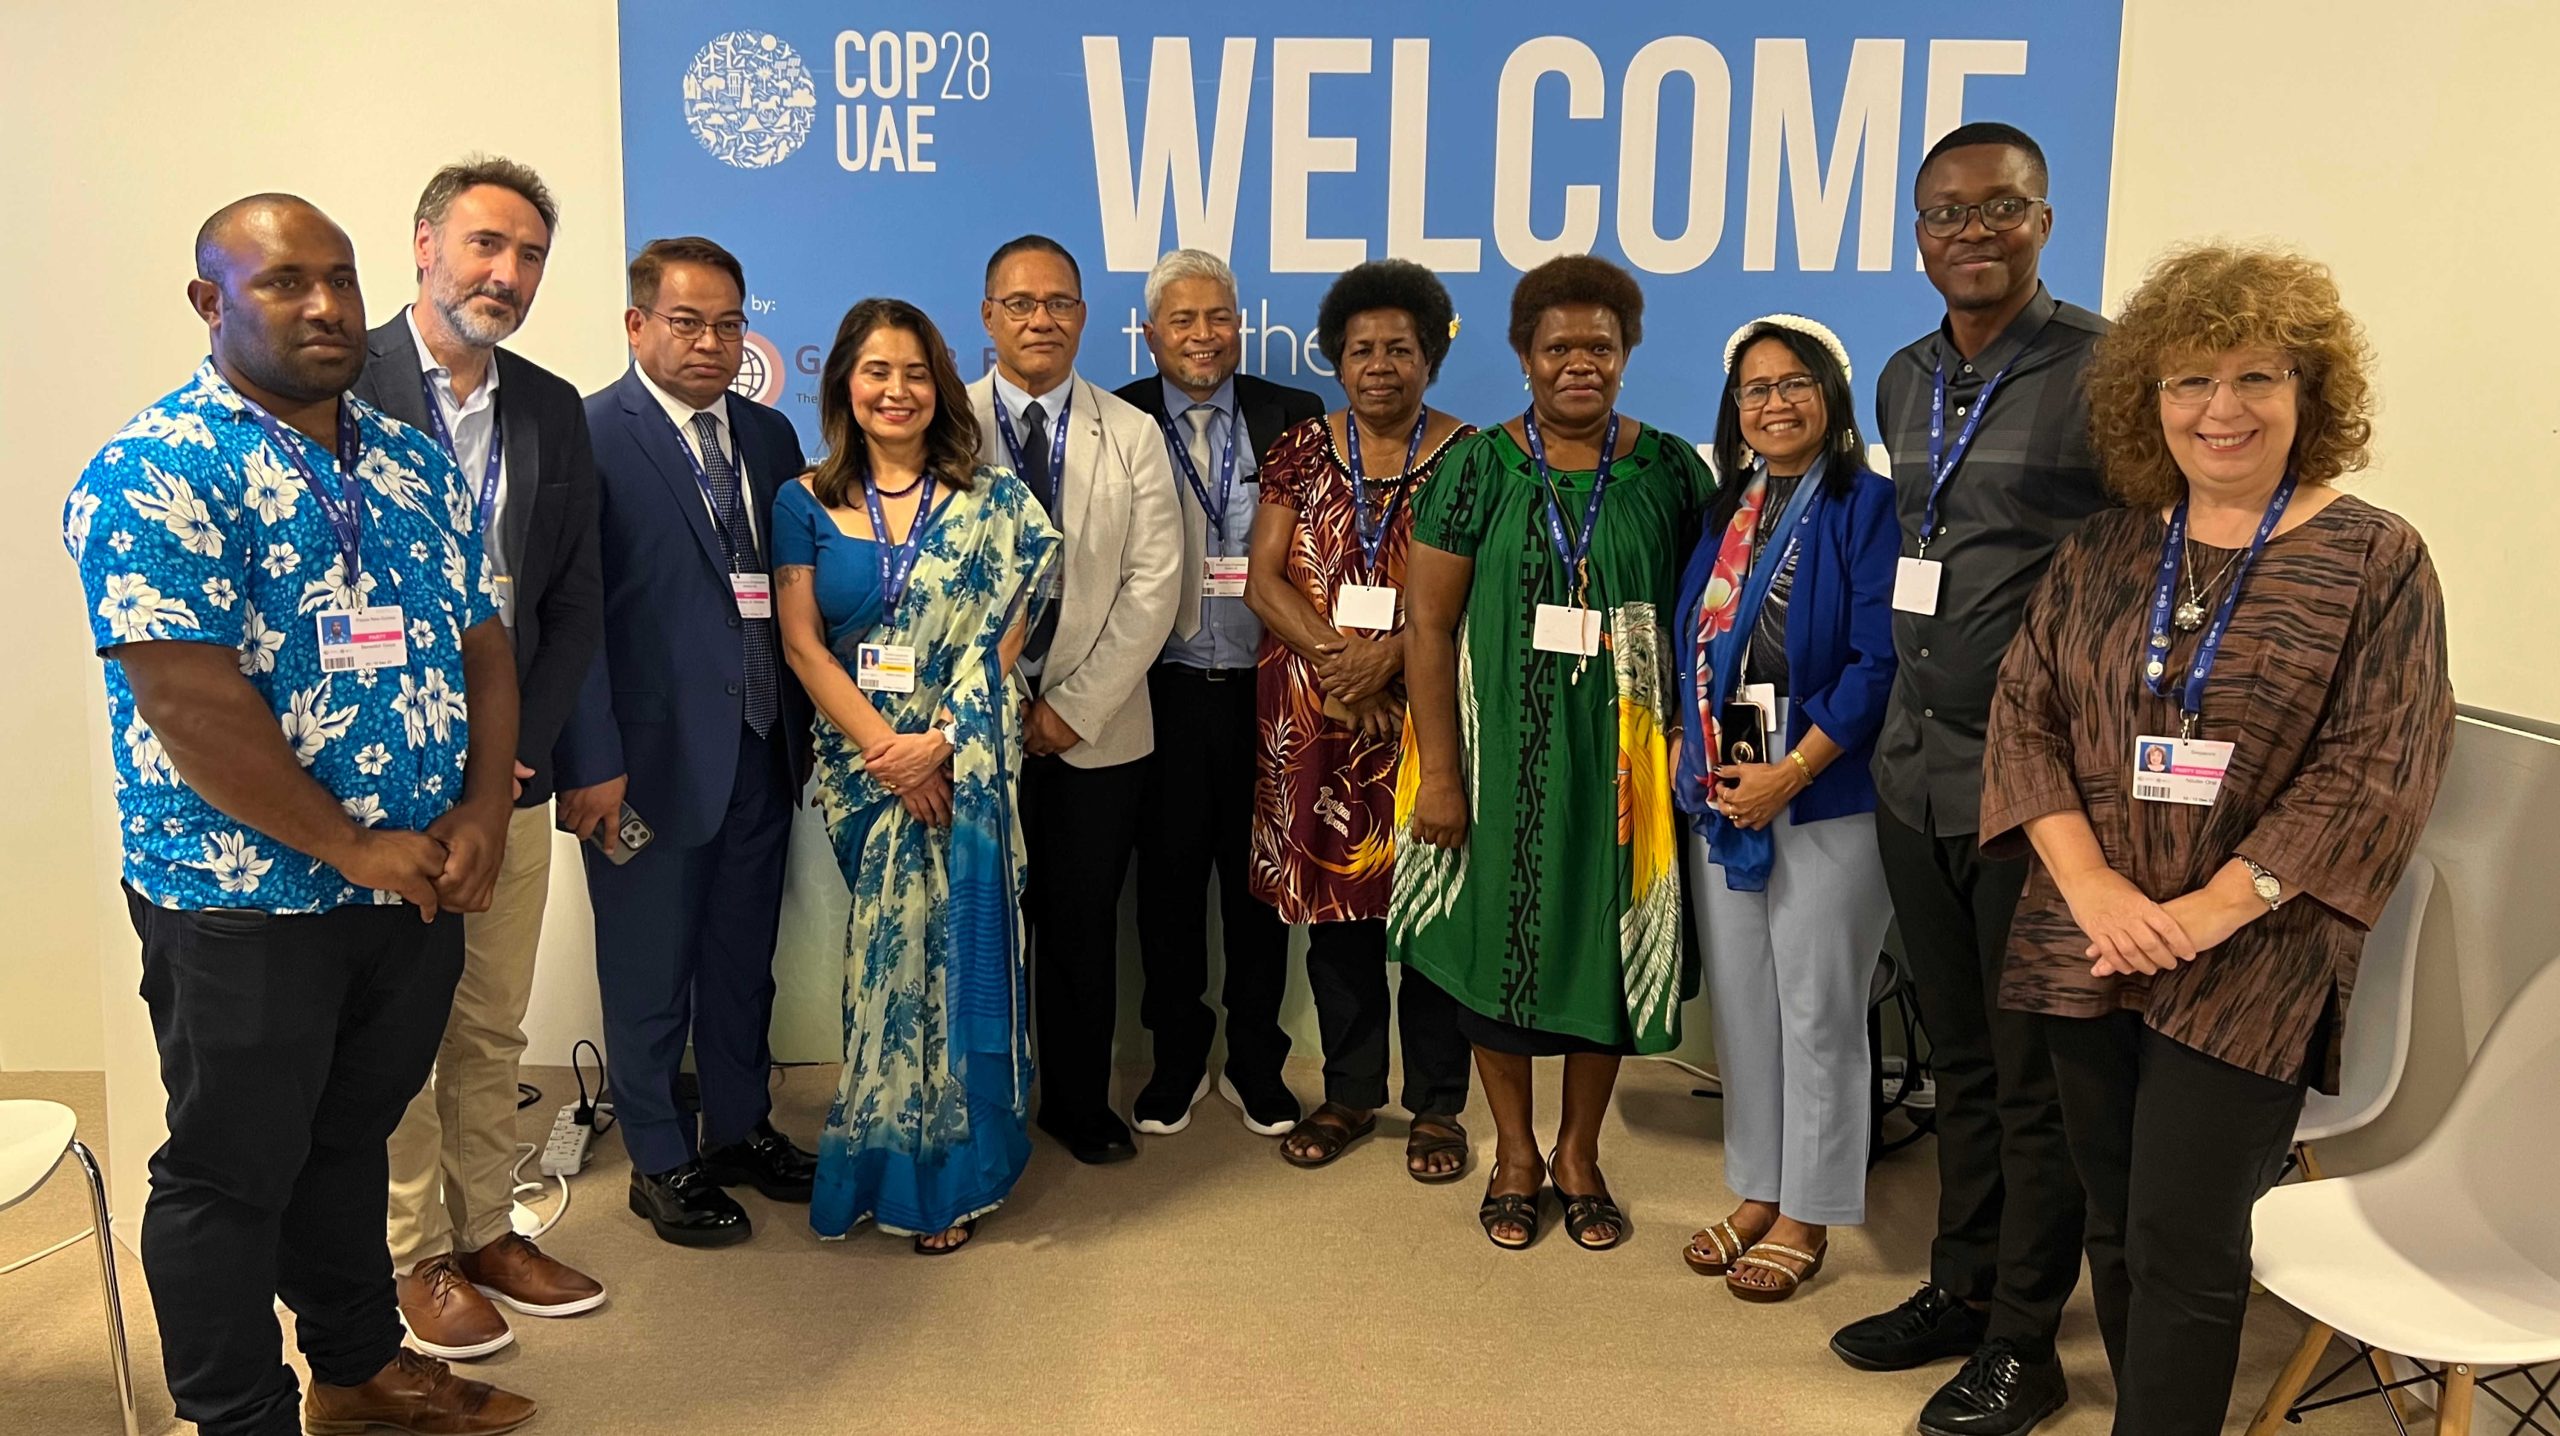 COP 28 in Dubai: A Transformative Conference Highlighting Parliamentarians’ Commitment to Climate Action